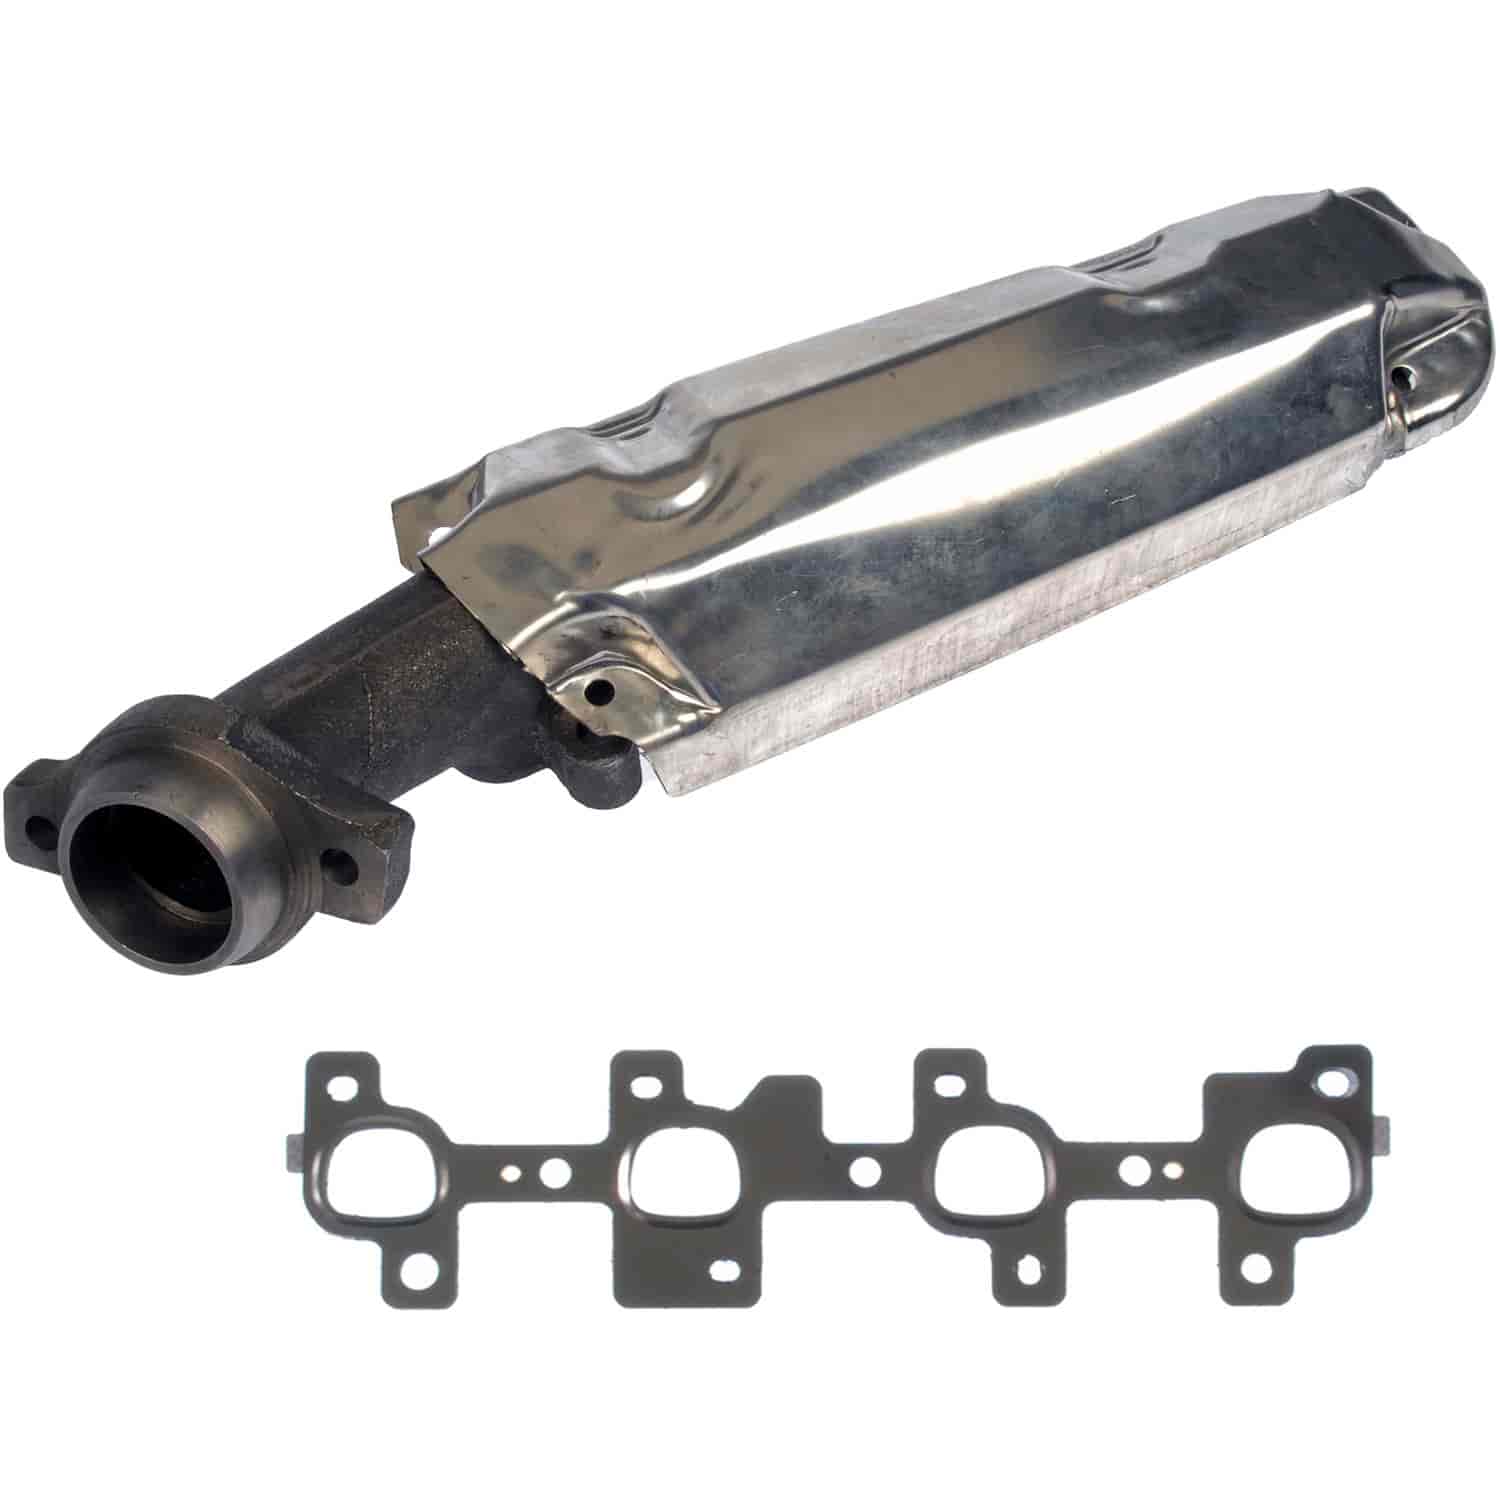 Cast Iron Exhaust Manifold - Includes Hardware and Gaskets